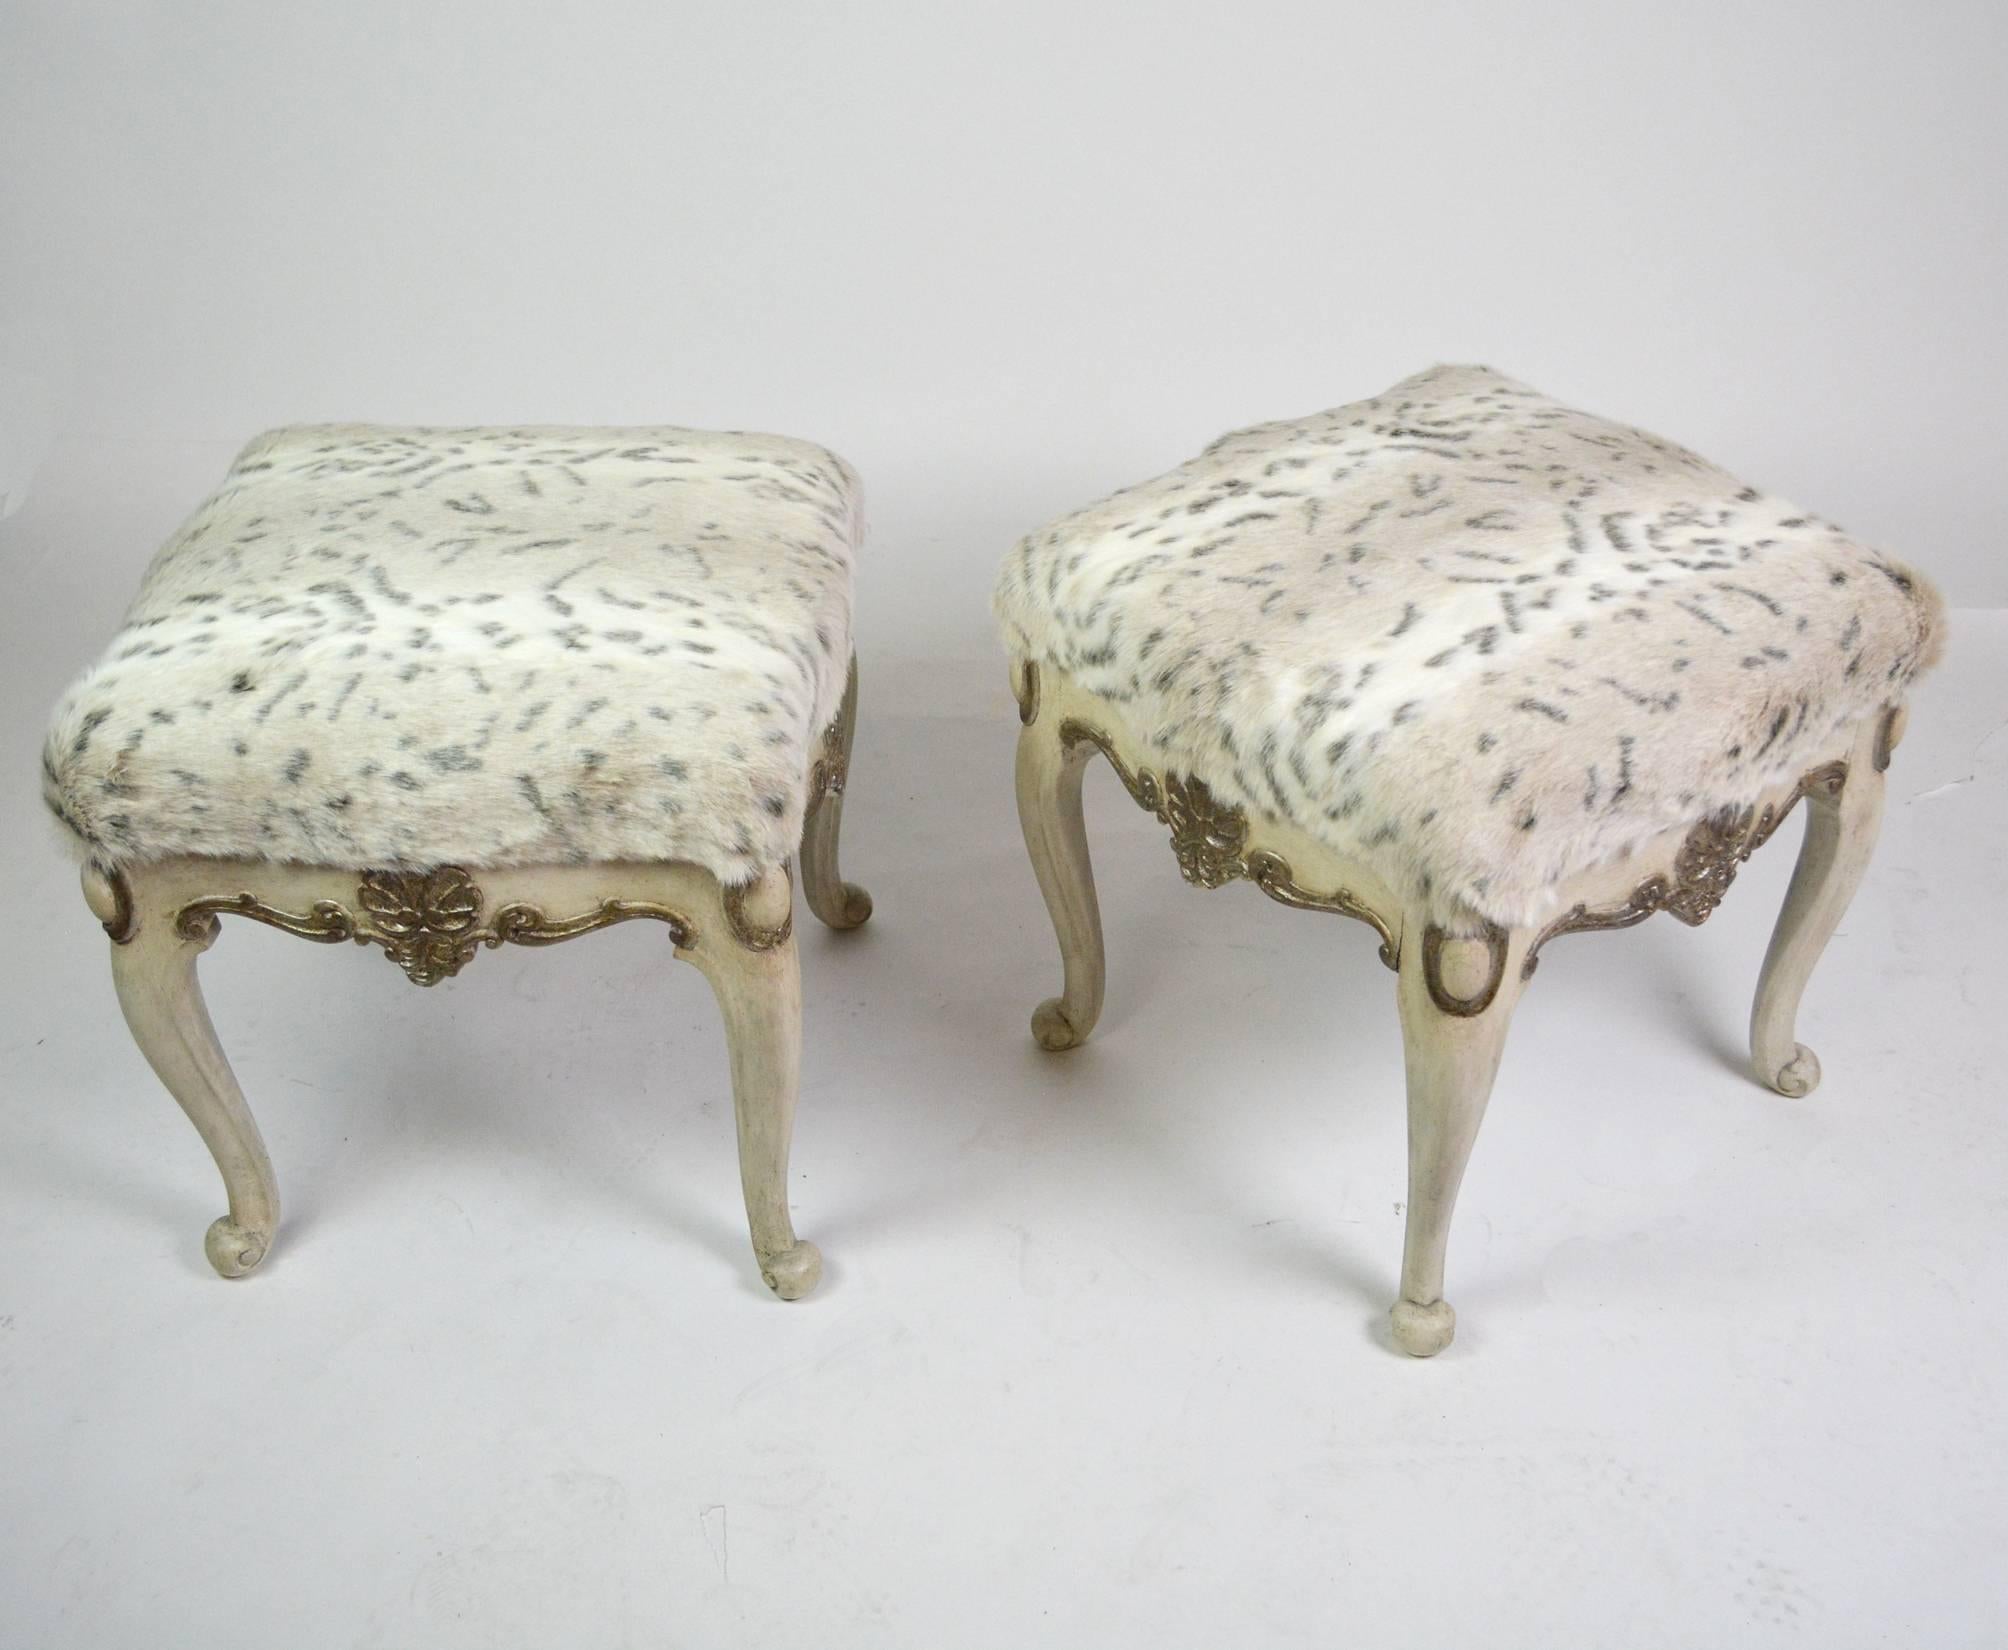 A pair of early 20th century Chippendale stools, with and antiqued paint finish and silver leafed details. Recently re-upholstered in Sahco faux fur.